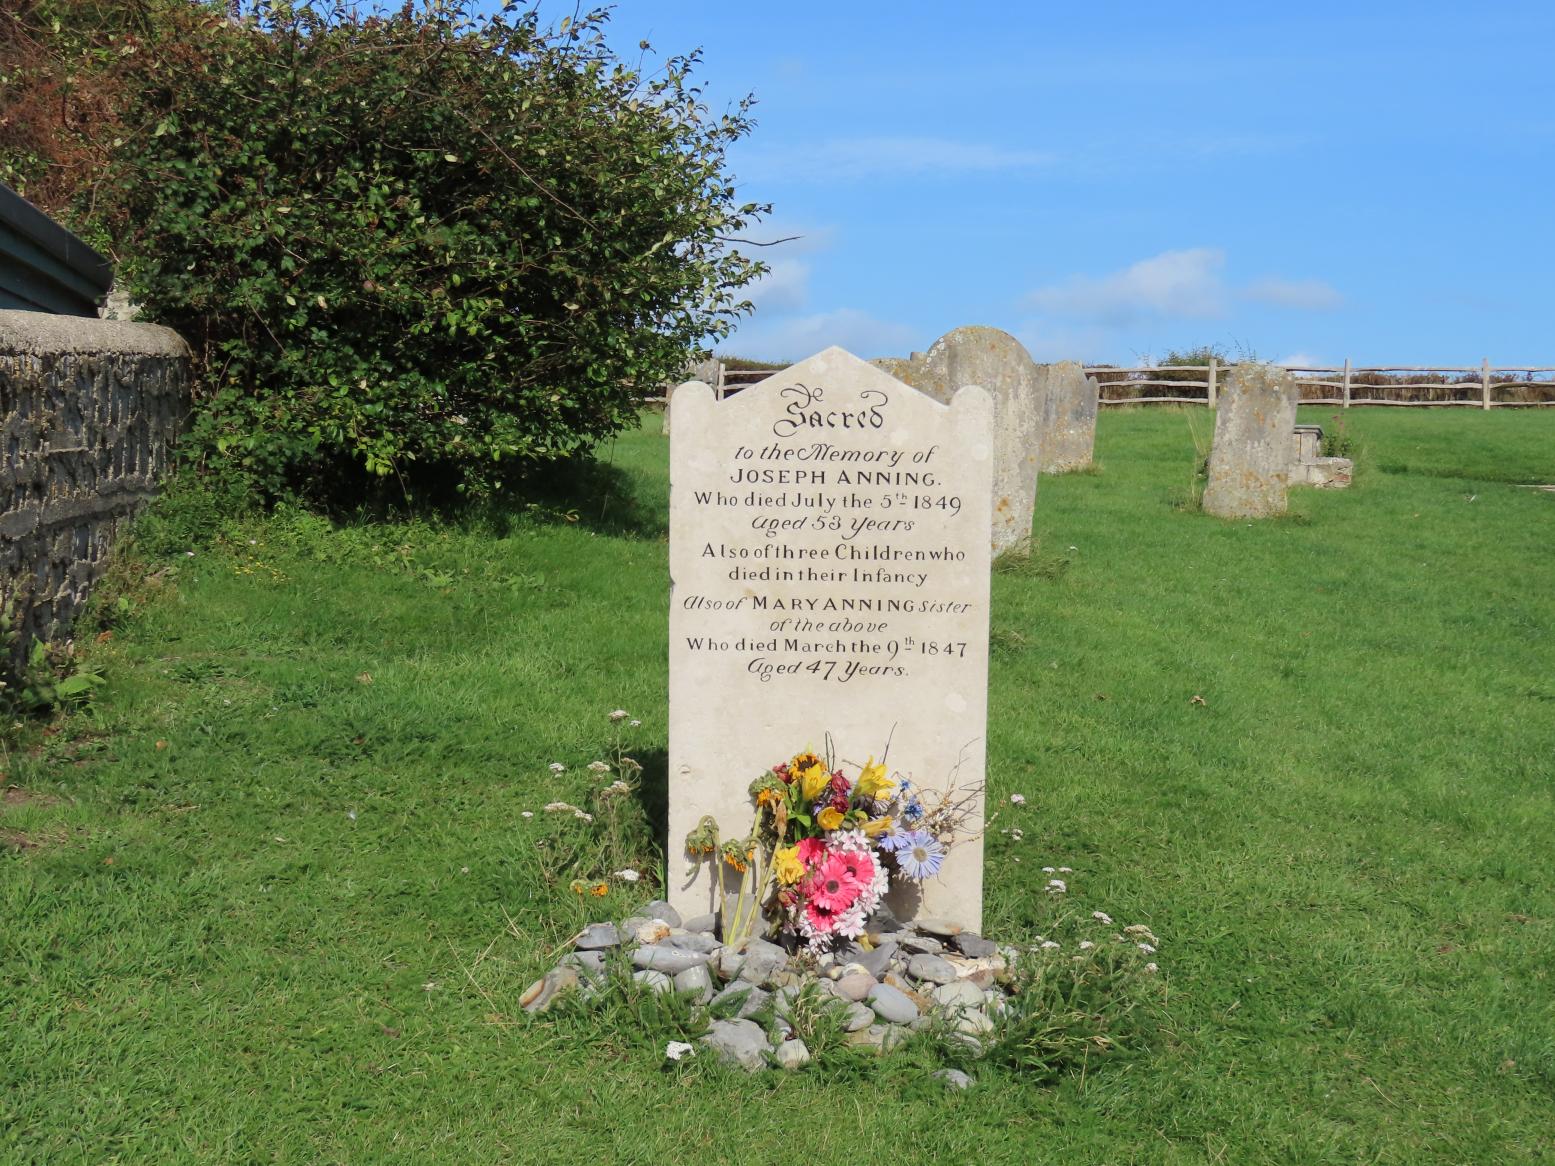 Mary Anning's grave in St Michael the Archangel Churchyard, Lyme Regis